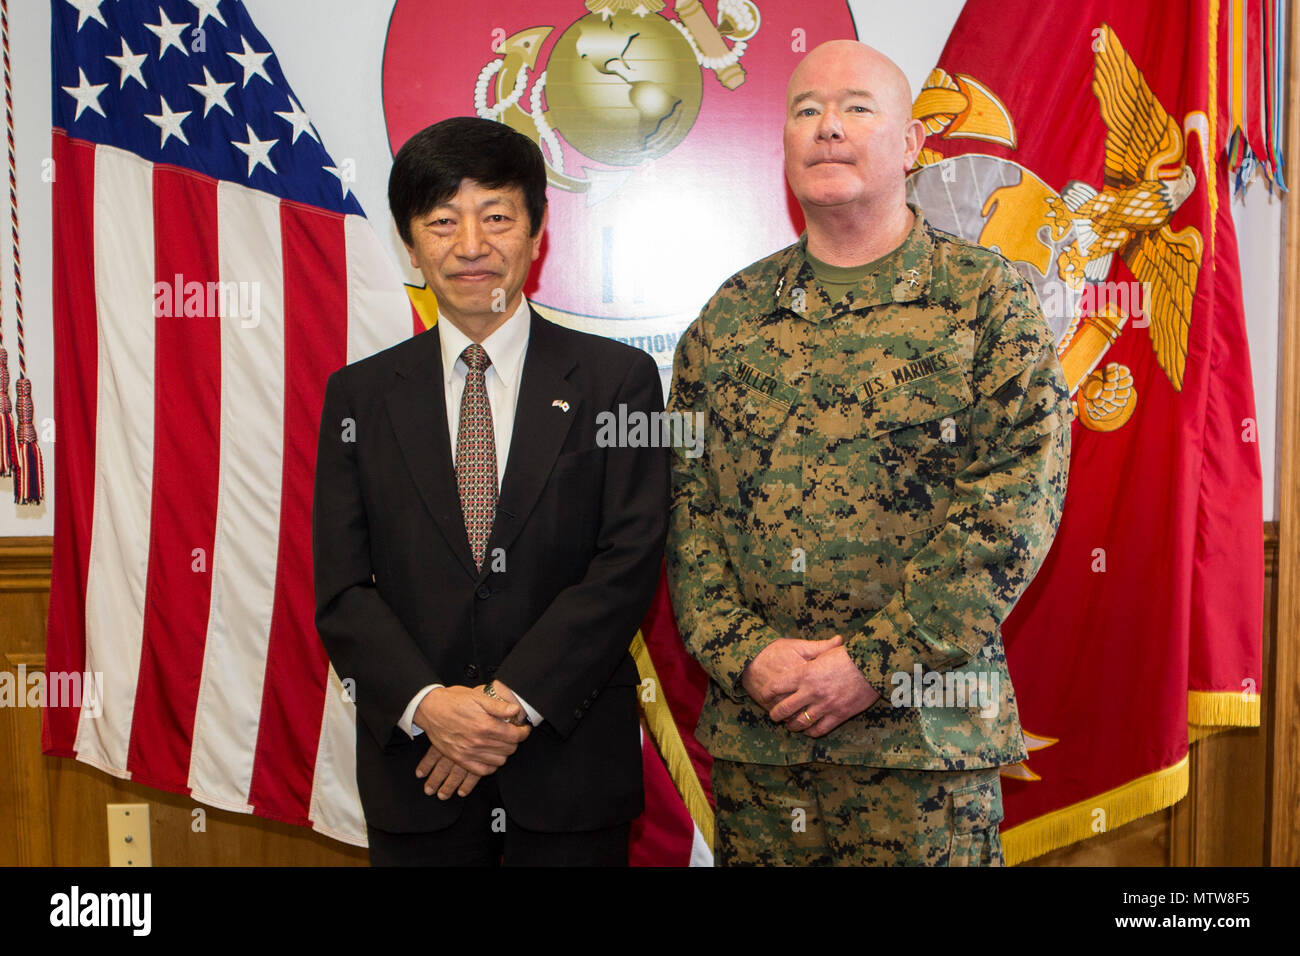 U.S. Marine Corps Maj. Gen. Walter L. Miller Jr., commanding general, II Marine Expeditionary Force (II MEF), poses for a photo with Consul General for Japan Takashi Shinozuka during a visit to Camp Lejeune, N.C., Jan. 20, 2017. The purpose of the visit was to provide Consul General Shinozuka an opportunity to meet with senior leadership of II MEF as well as a familiarization overview of the MV-22 Osprey training syllabus that Japanese pilots are undergoing at Marine Corps Air Station New River. (U.S. Marine Corps photo by Cpl. Abraham Lopez) Stock Photo